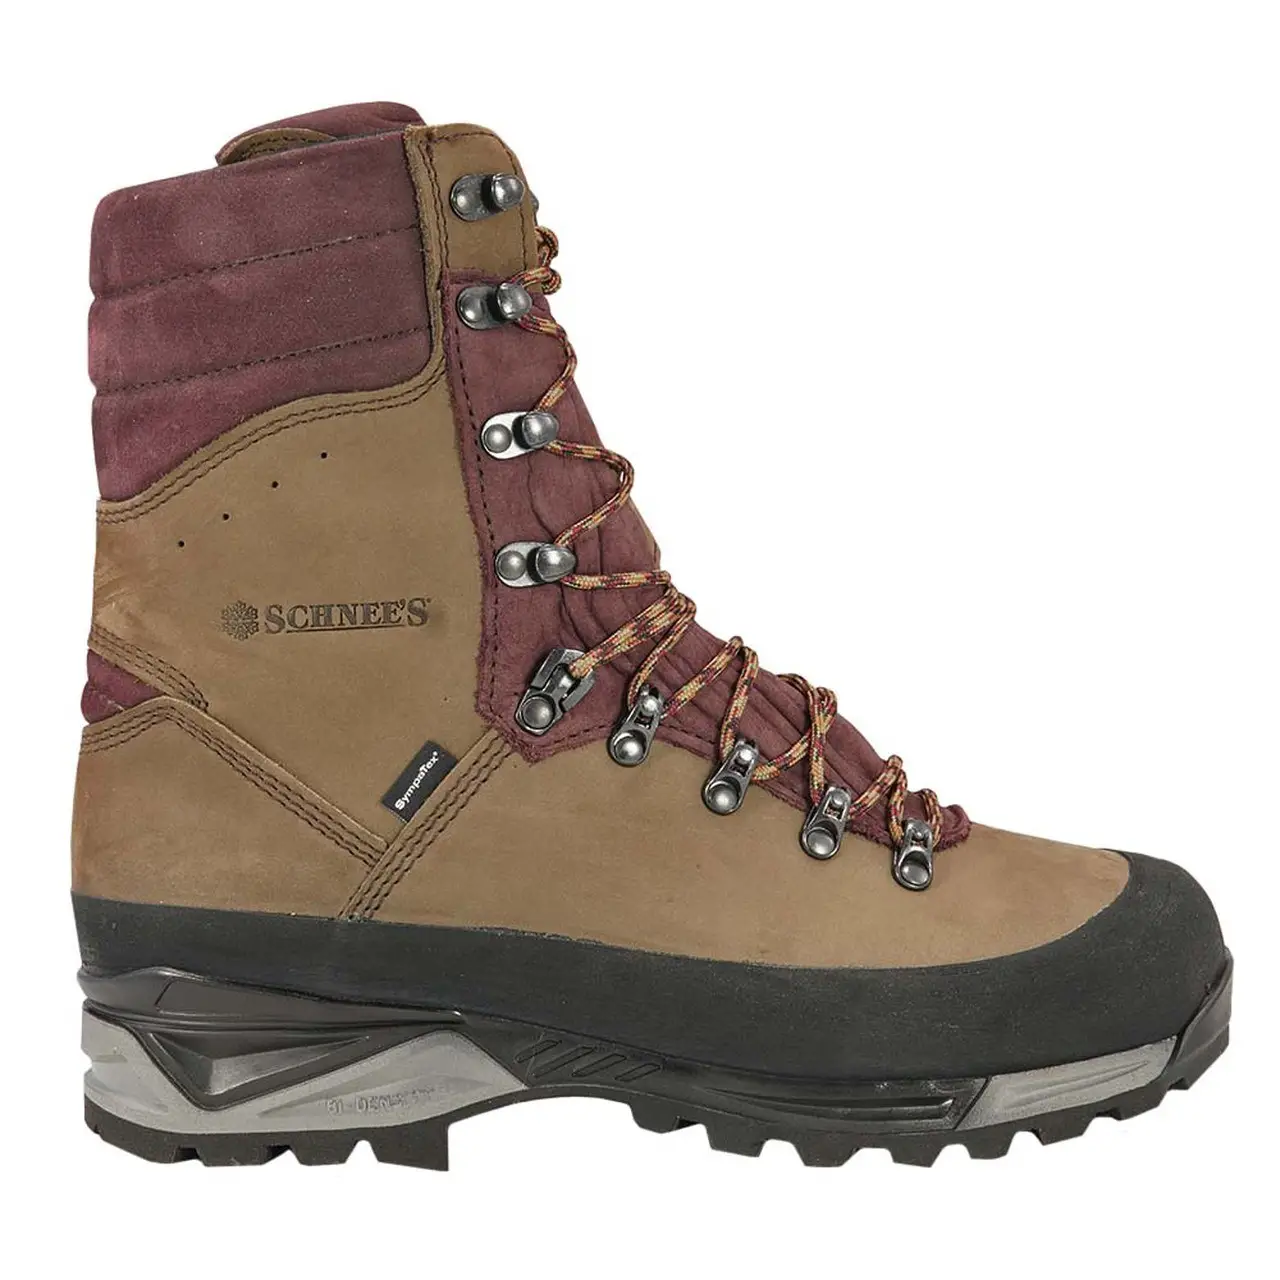 Schnee’s Beartooth Hunting Boots